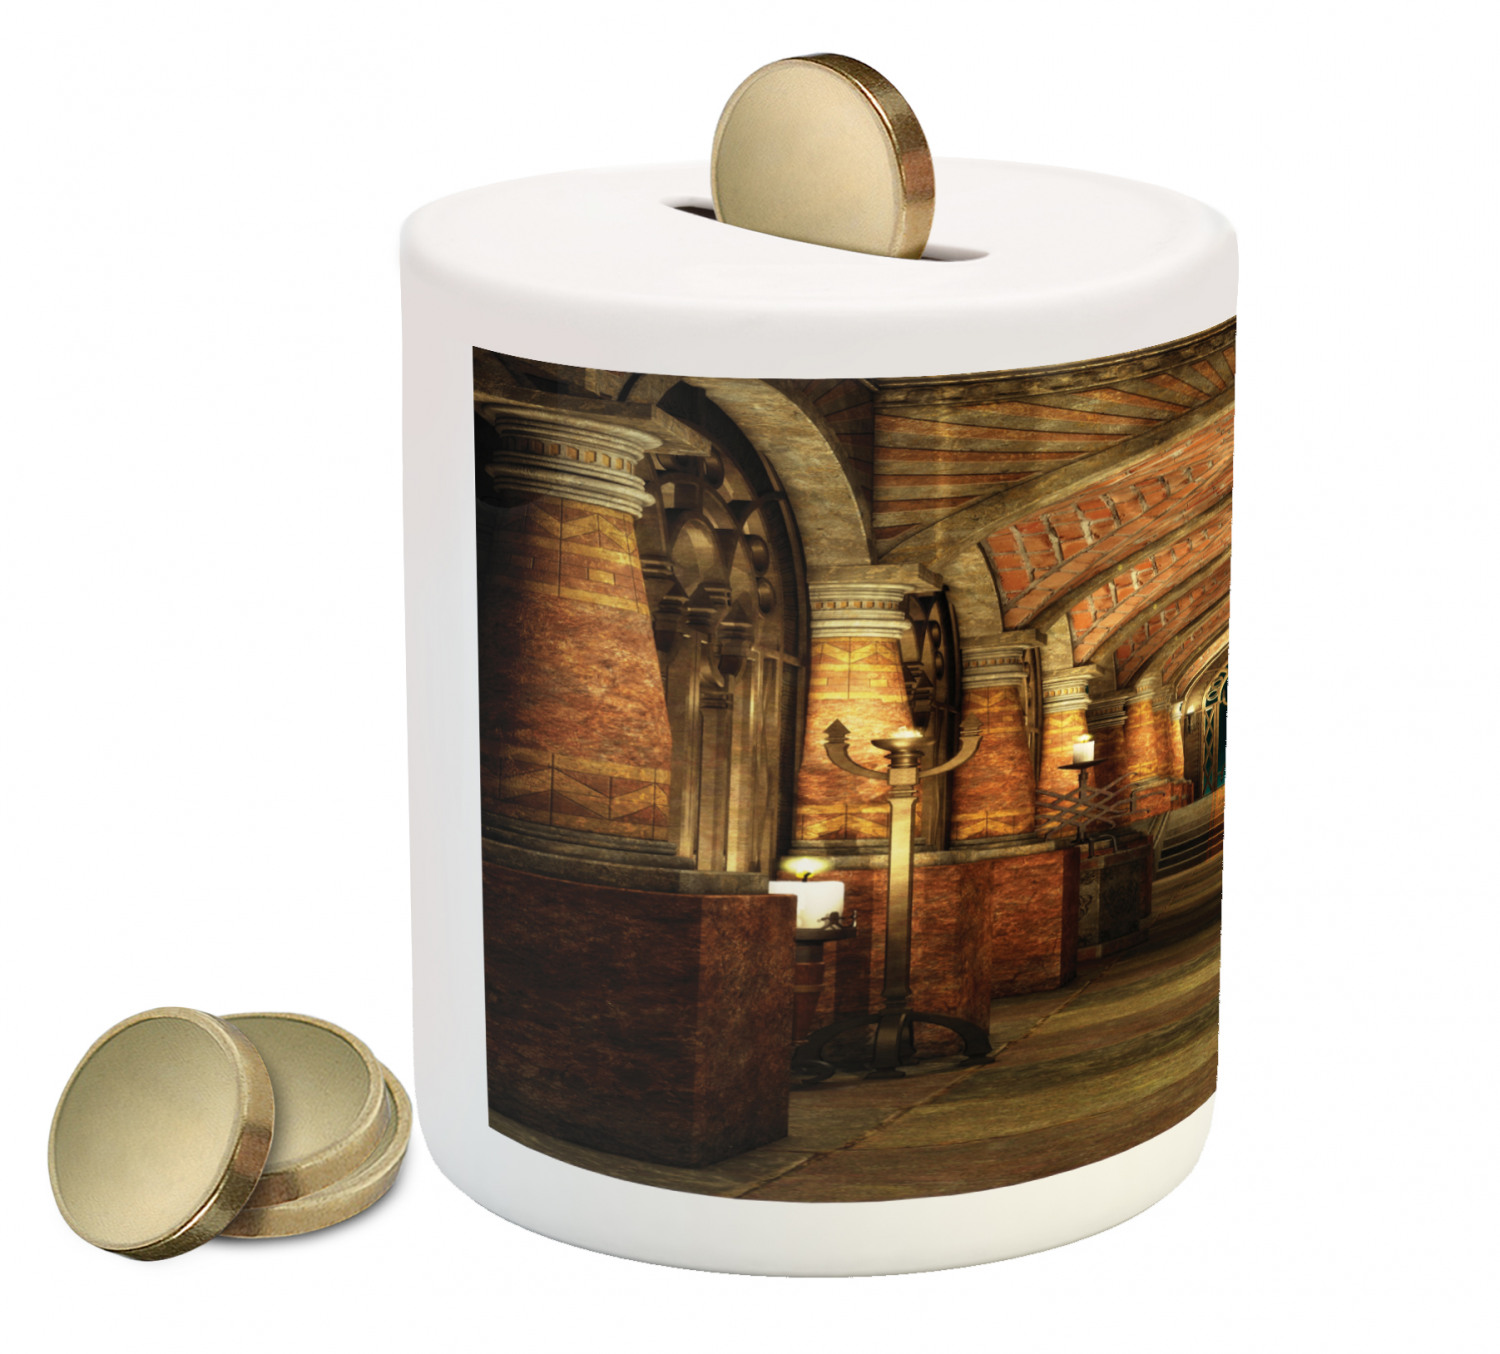 Gothic Piggy Bank, Passage Stairways Secret Gateway Pillars Medieval Building Theme, Ceramic Coin Bank Money Box for Cash Saving, 3.6" X 3.2", Brown and Red, by Ambesonne - image 2 of 4